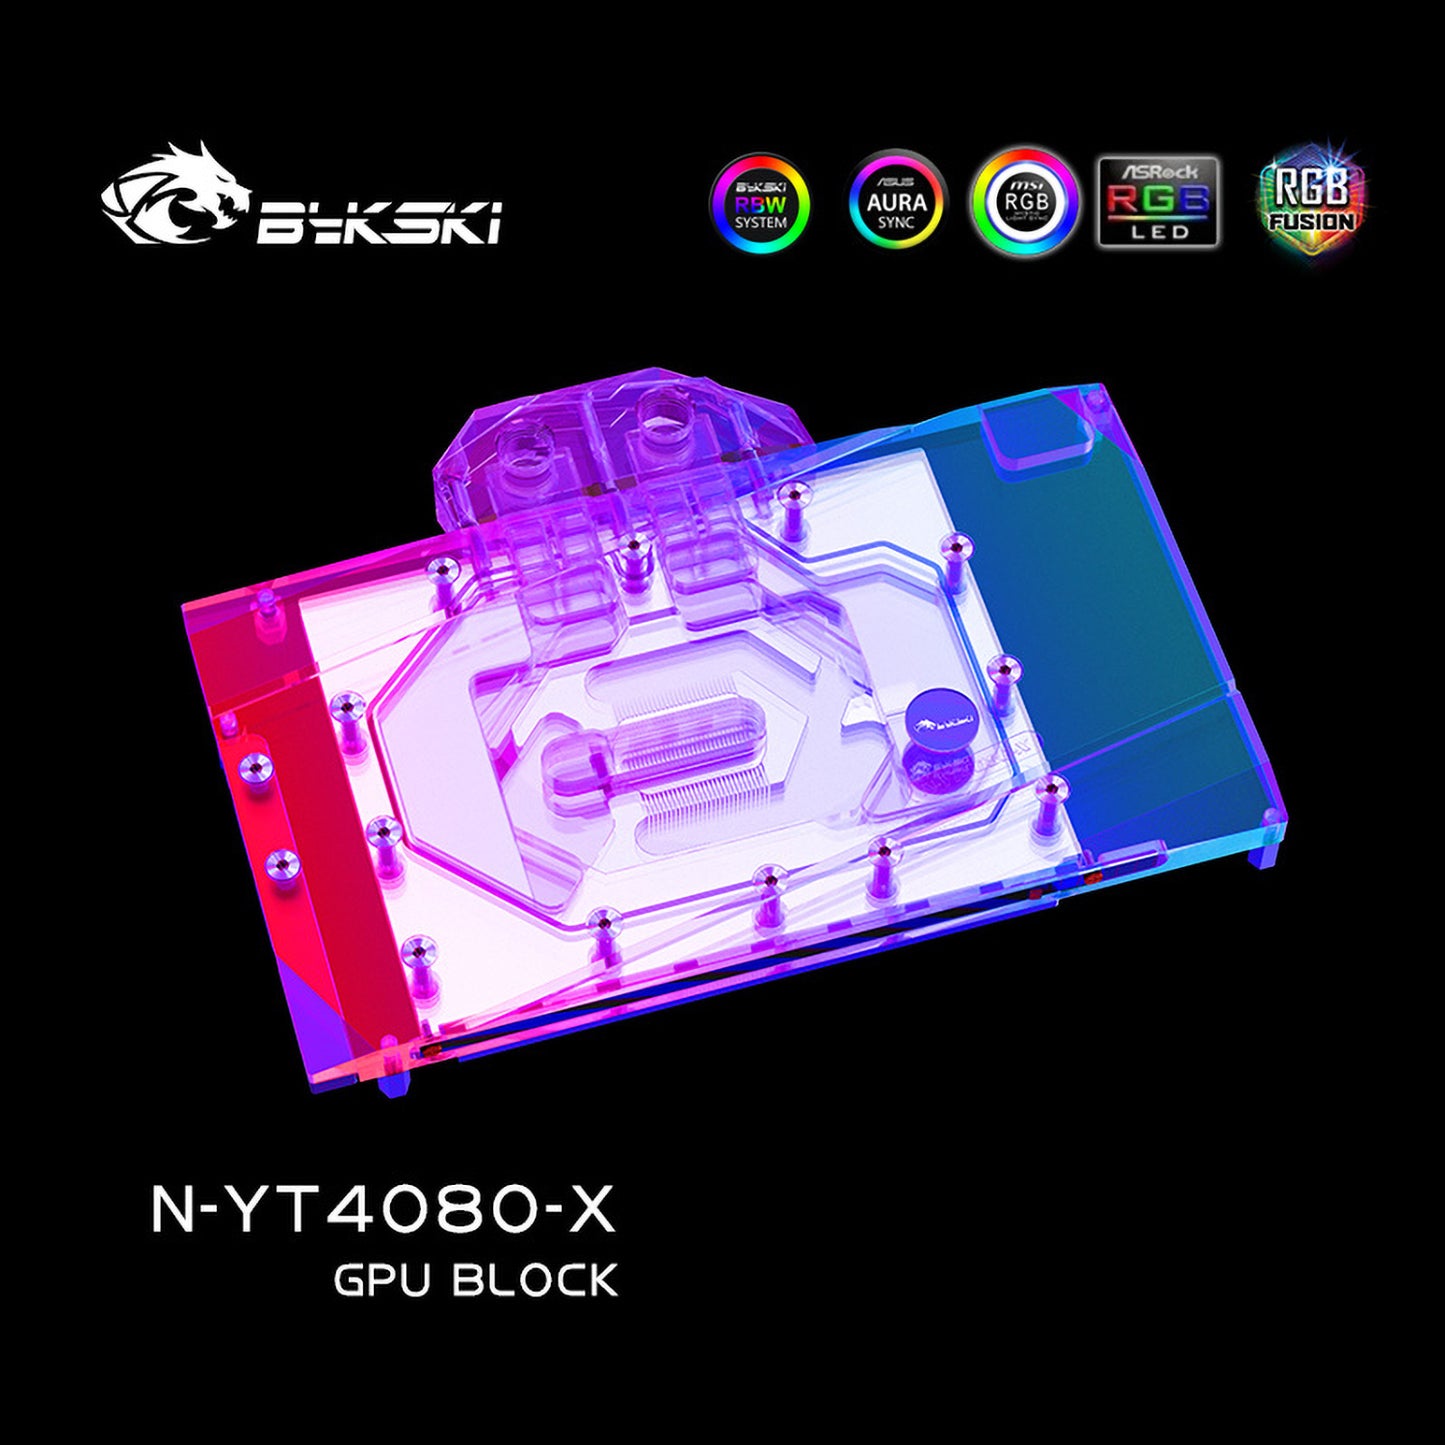 Bykski GPU Water Block For Yeston RTX 4080 16G D6X Sugar, Full Cover With Backplate PC Water Cooling Cooler, N-YT4080-X